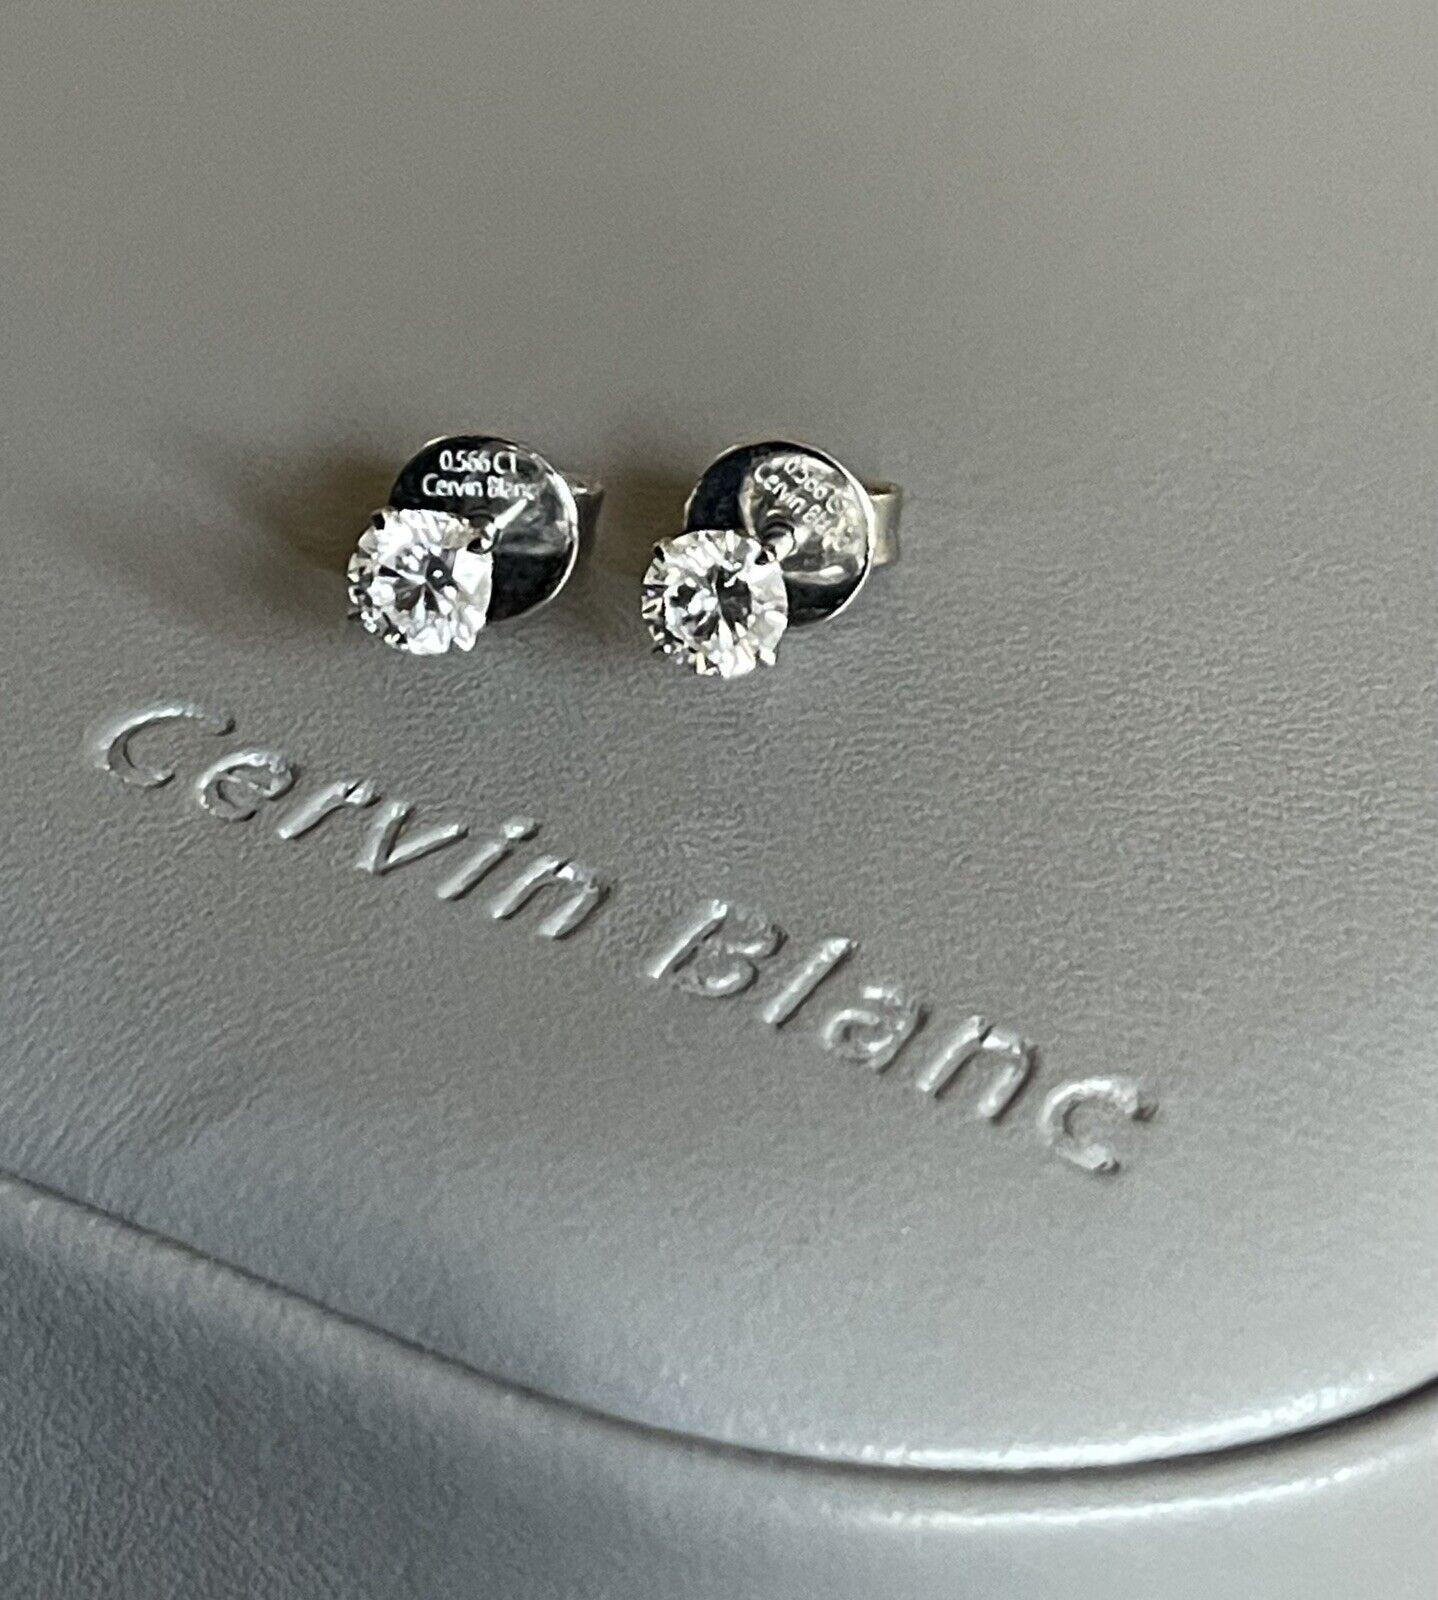 Cervin Blanc 18ct White Gold Solitaire Diamond Earrings 0.57ct Hidden Halo Studs In New Condition For Sale In Ilford, GB